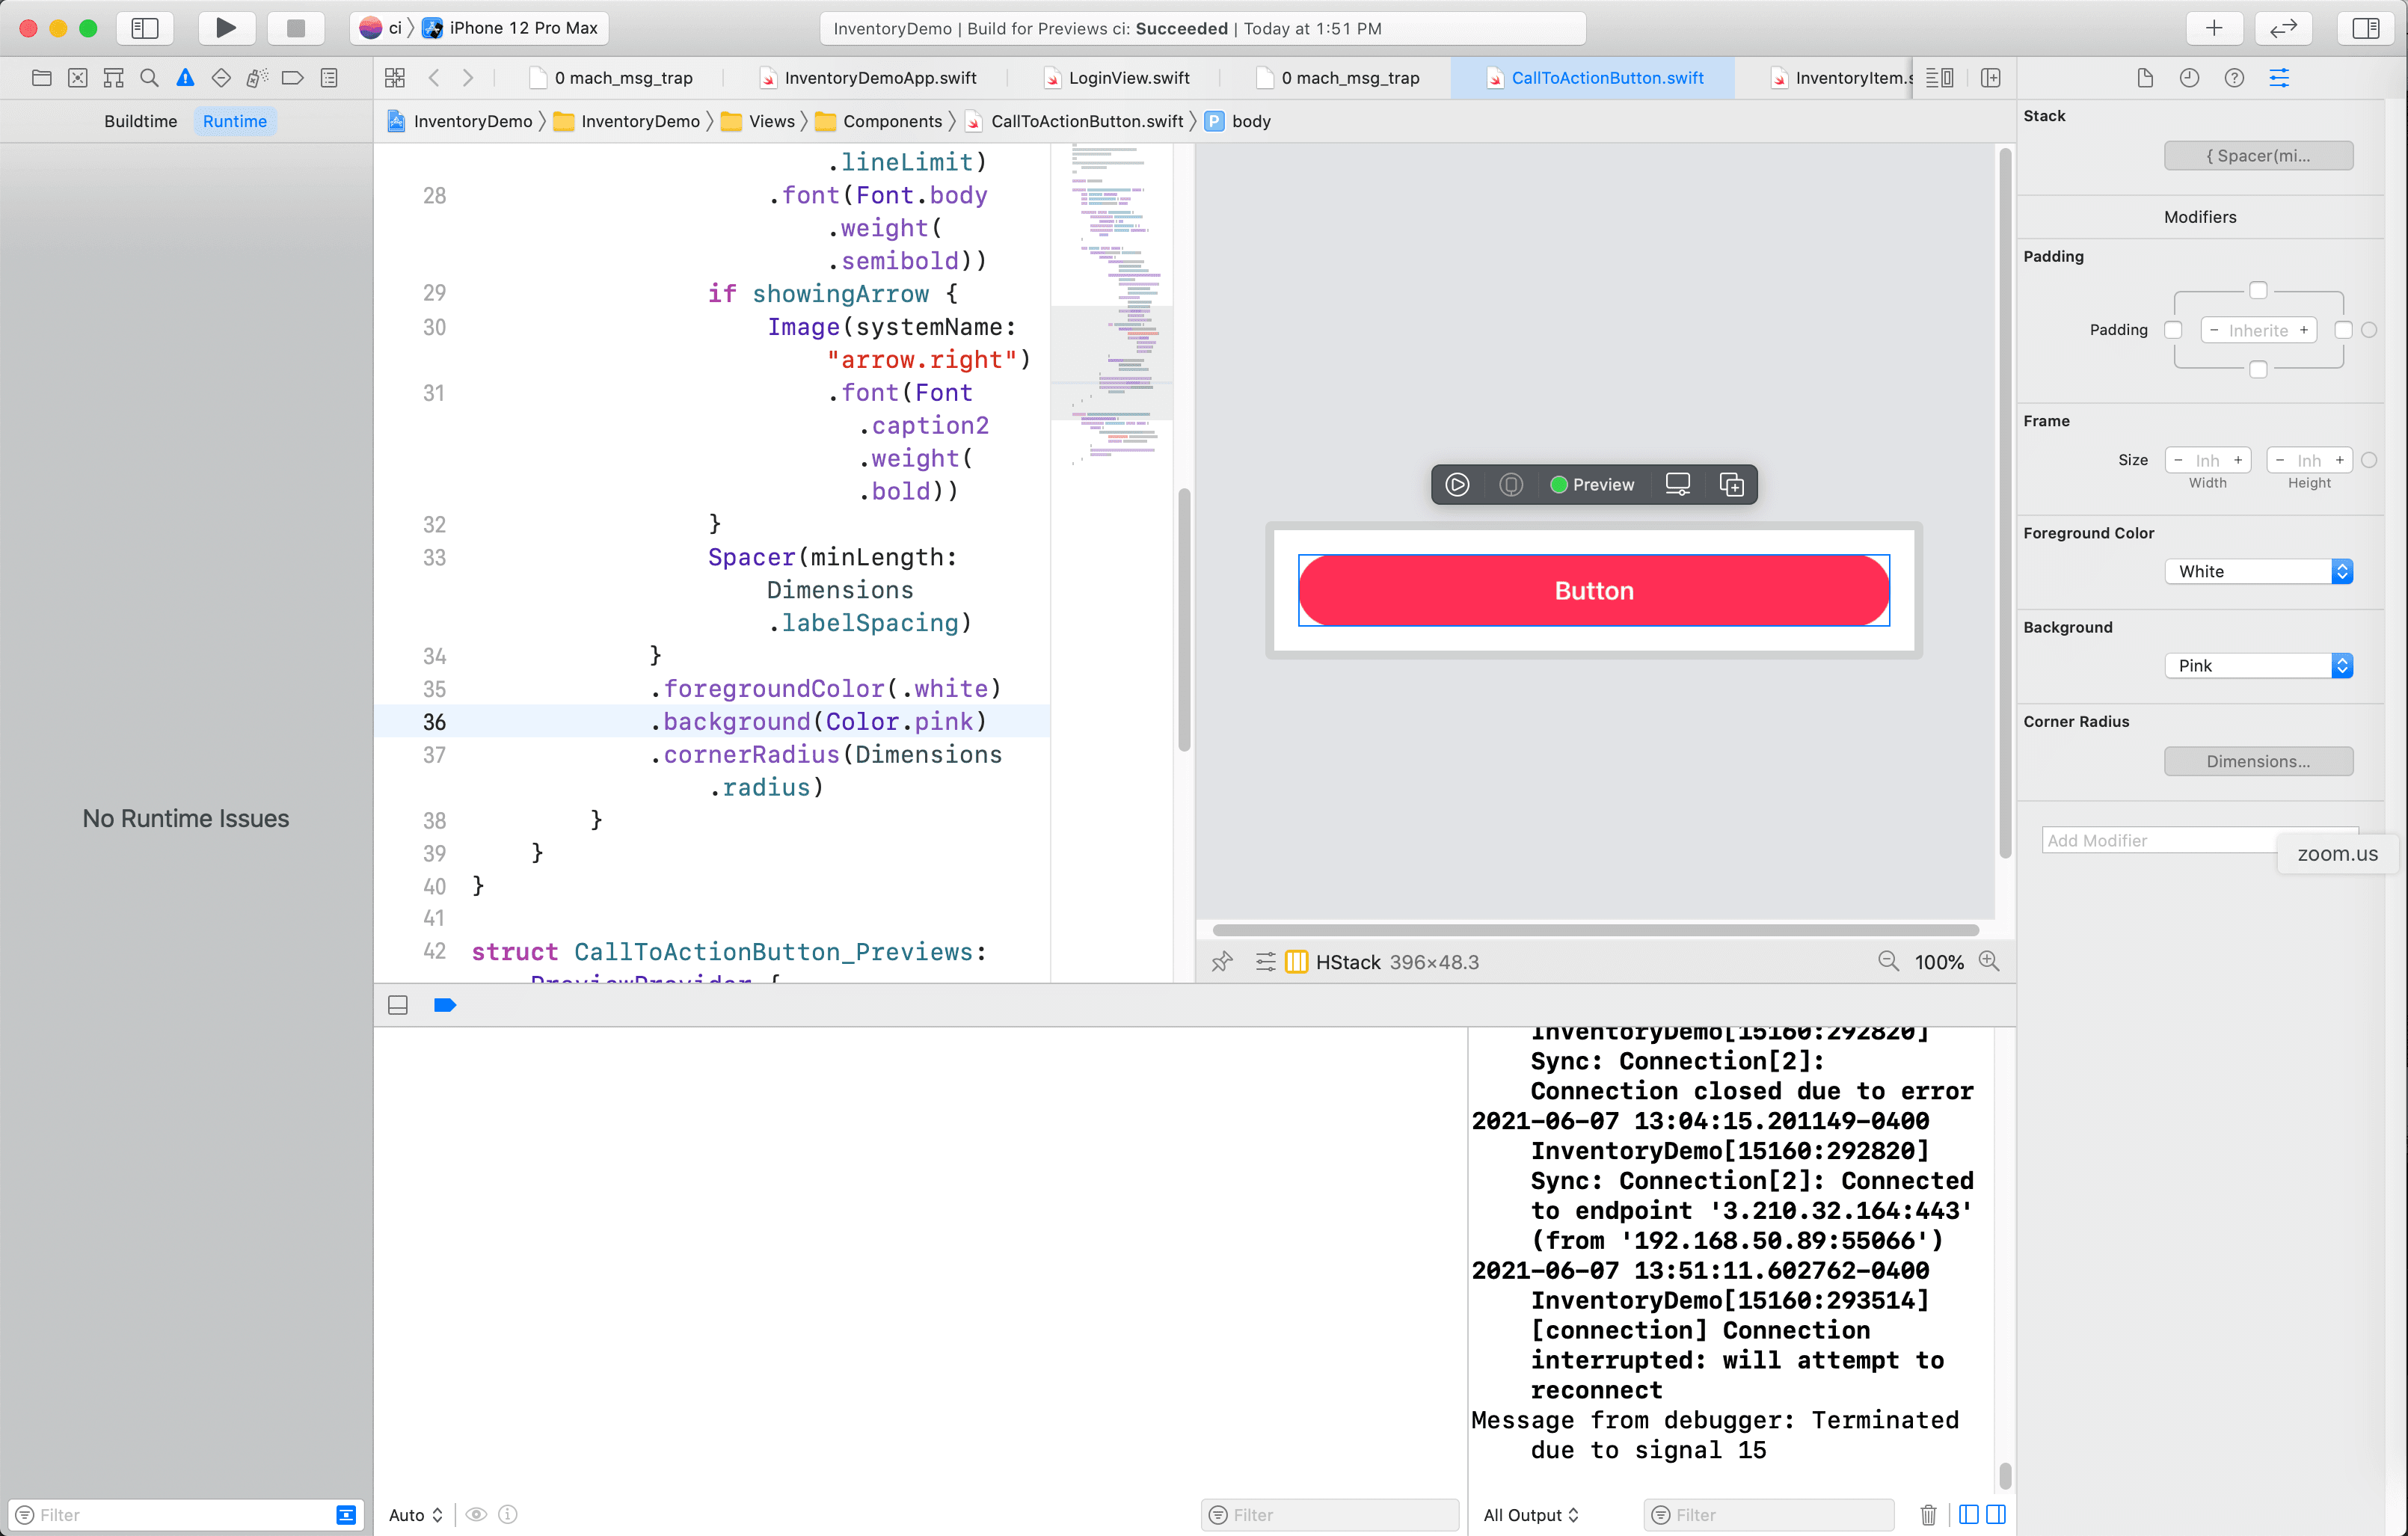 Updating the button color in Xcode